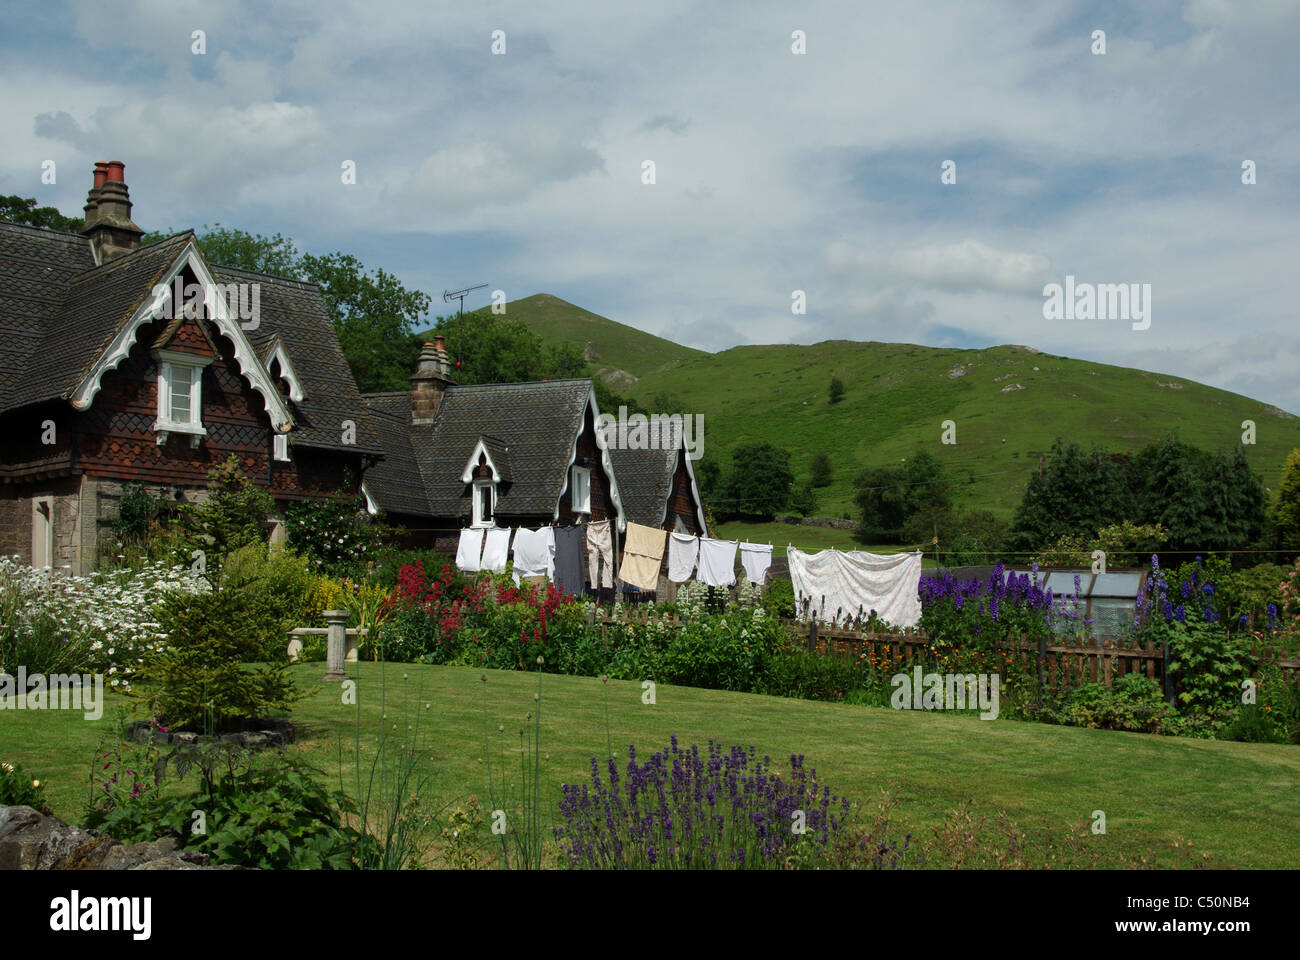 Washday in the Staffordshire village of Ilam Stock Photo